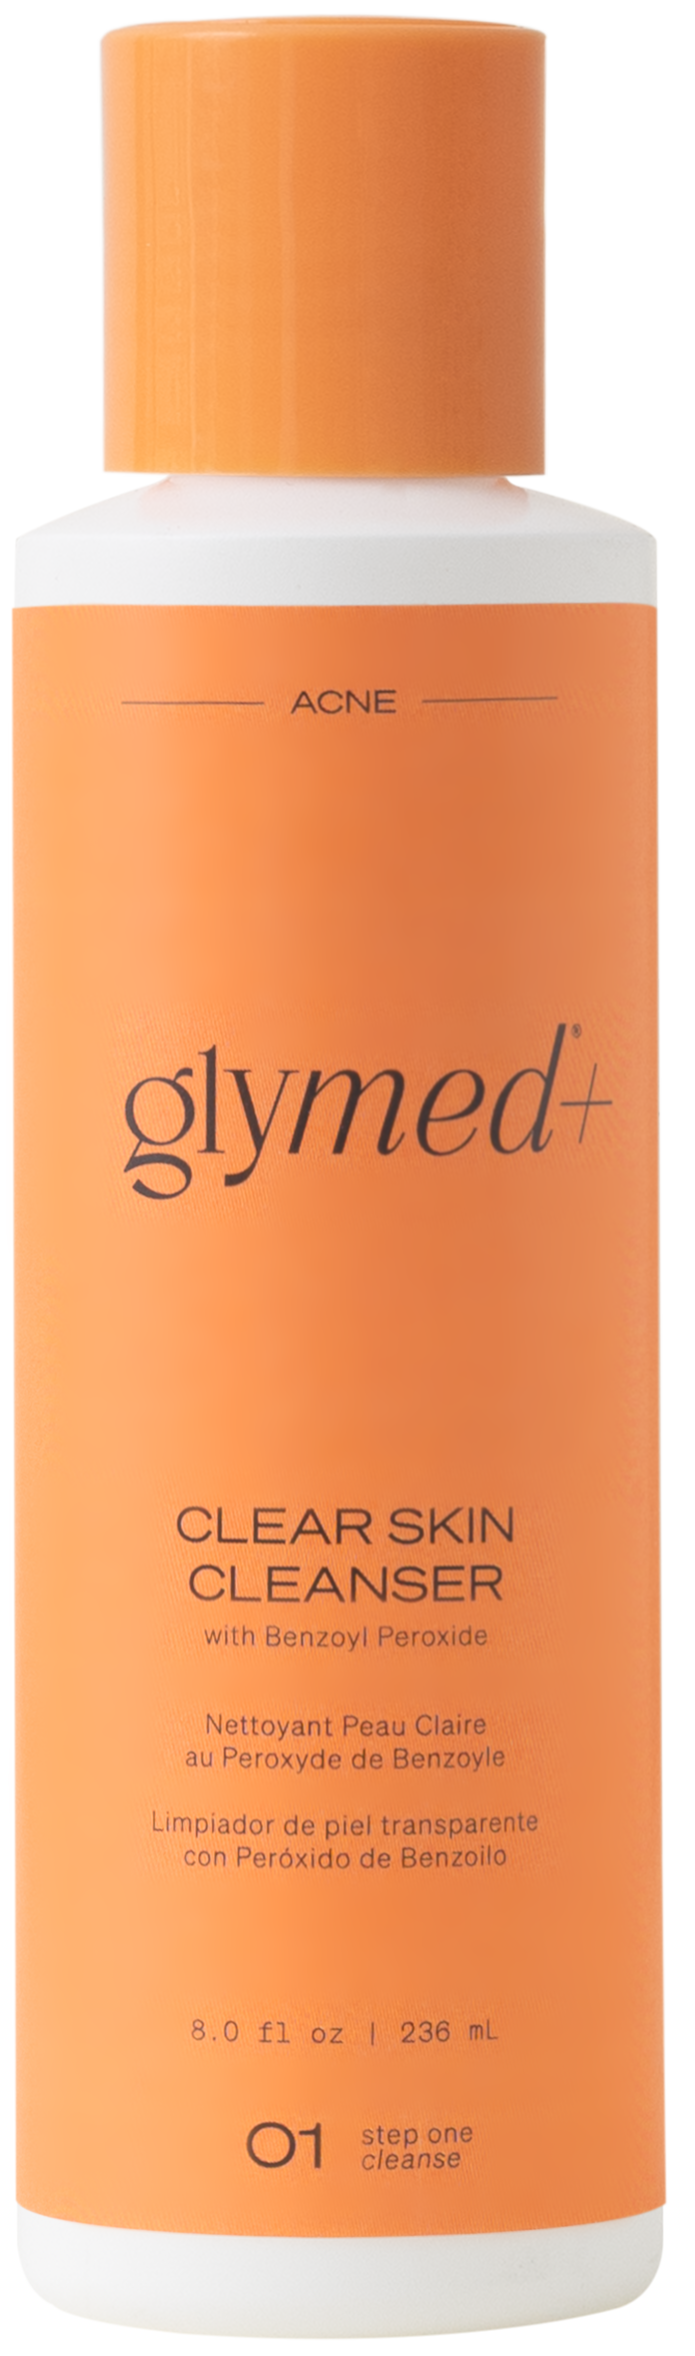 Clear Skin Cleanser with Benzoyl Peroxide